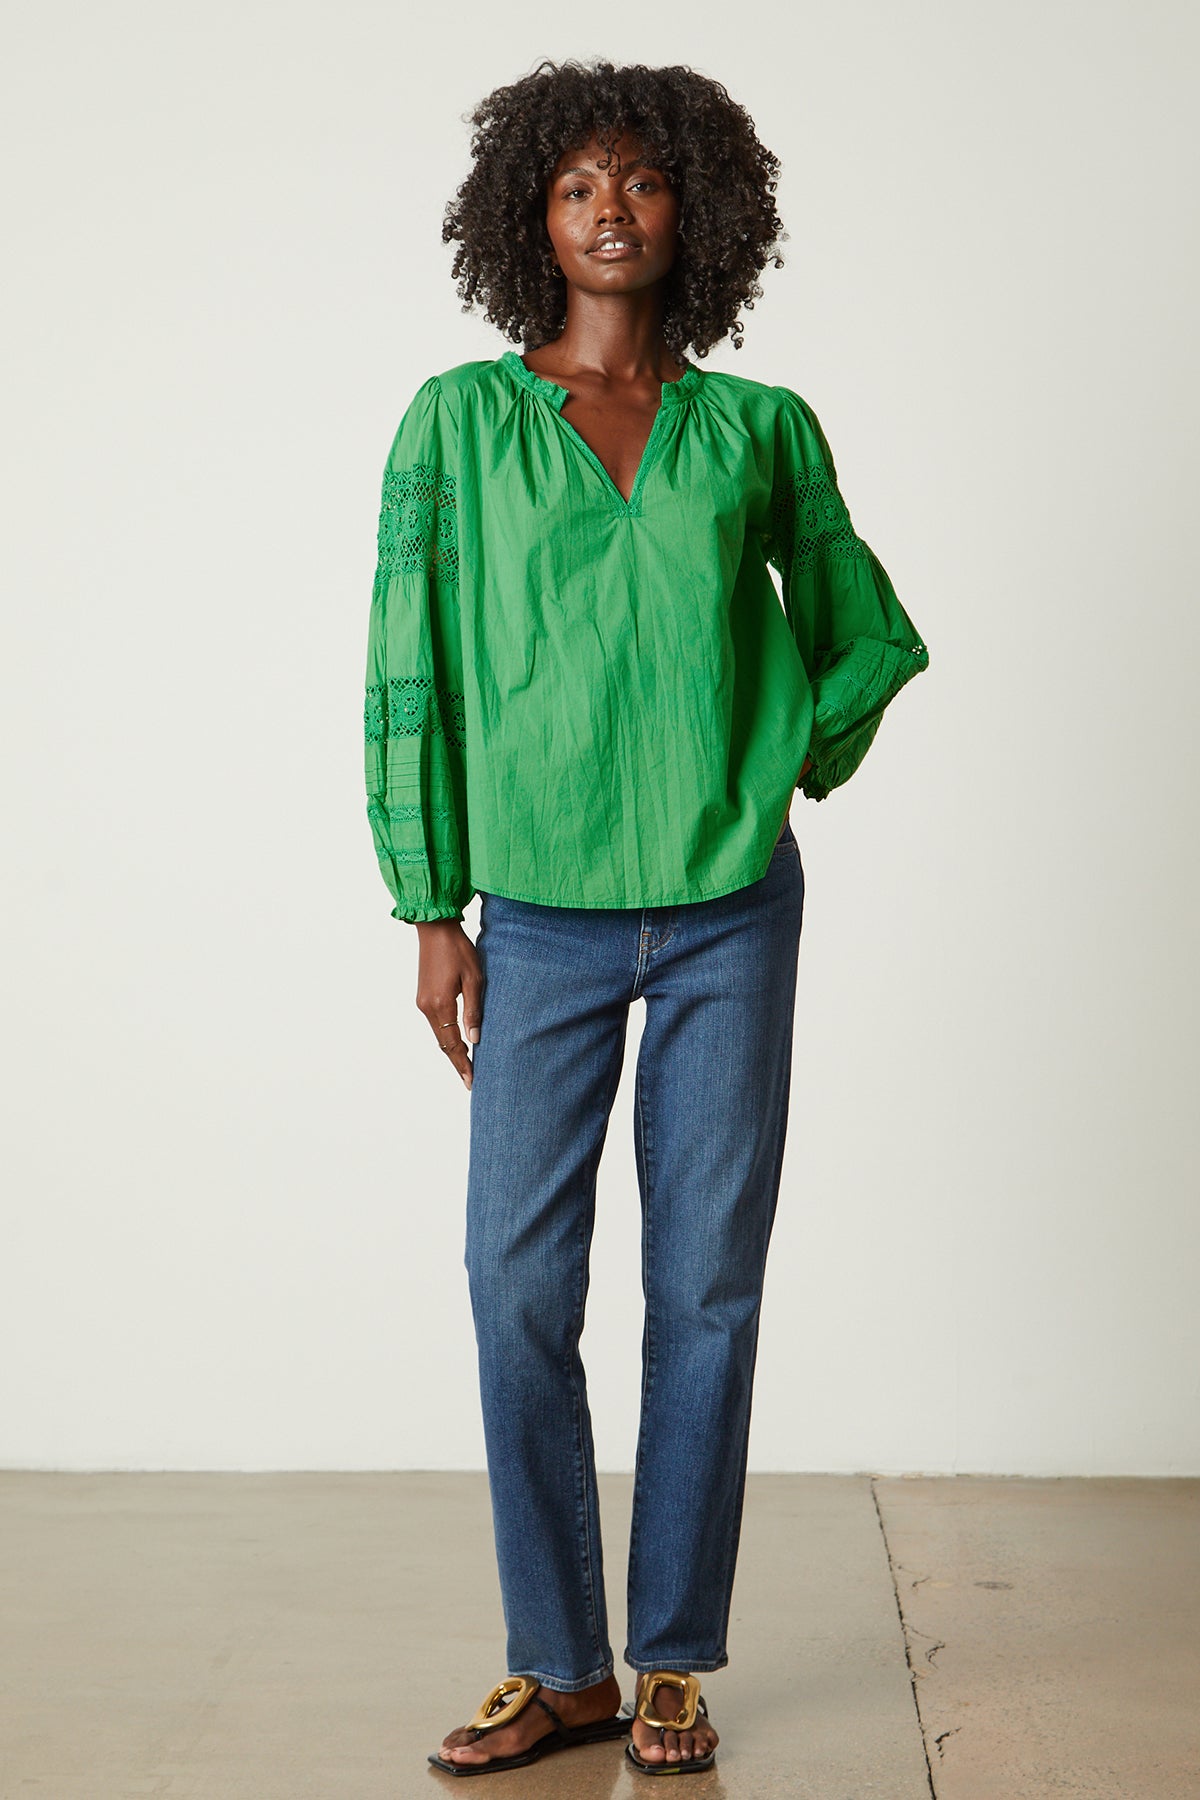   The model is wearing a green Velvet by Graham & Spencer TAYLER COTTON LACE BOHO TOP and jeans. 